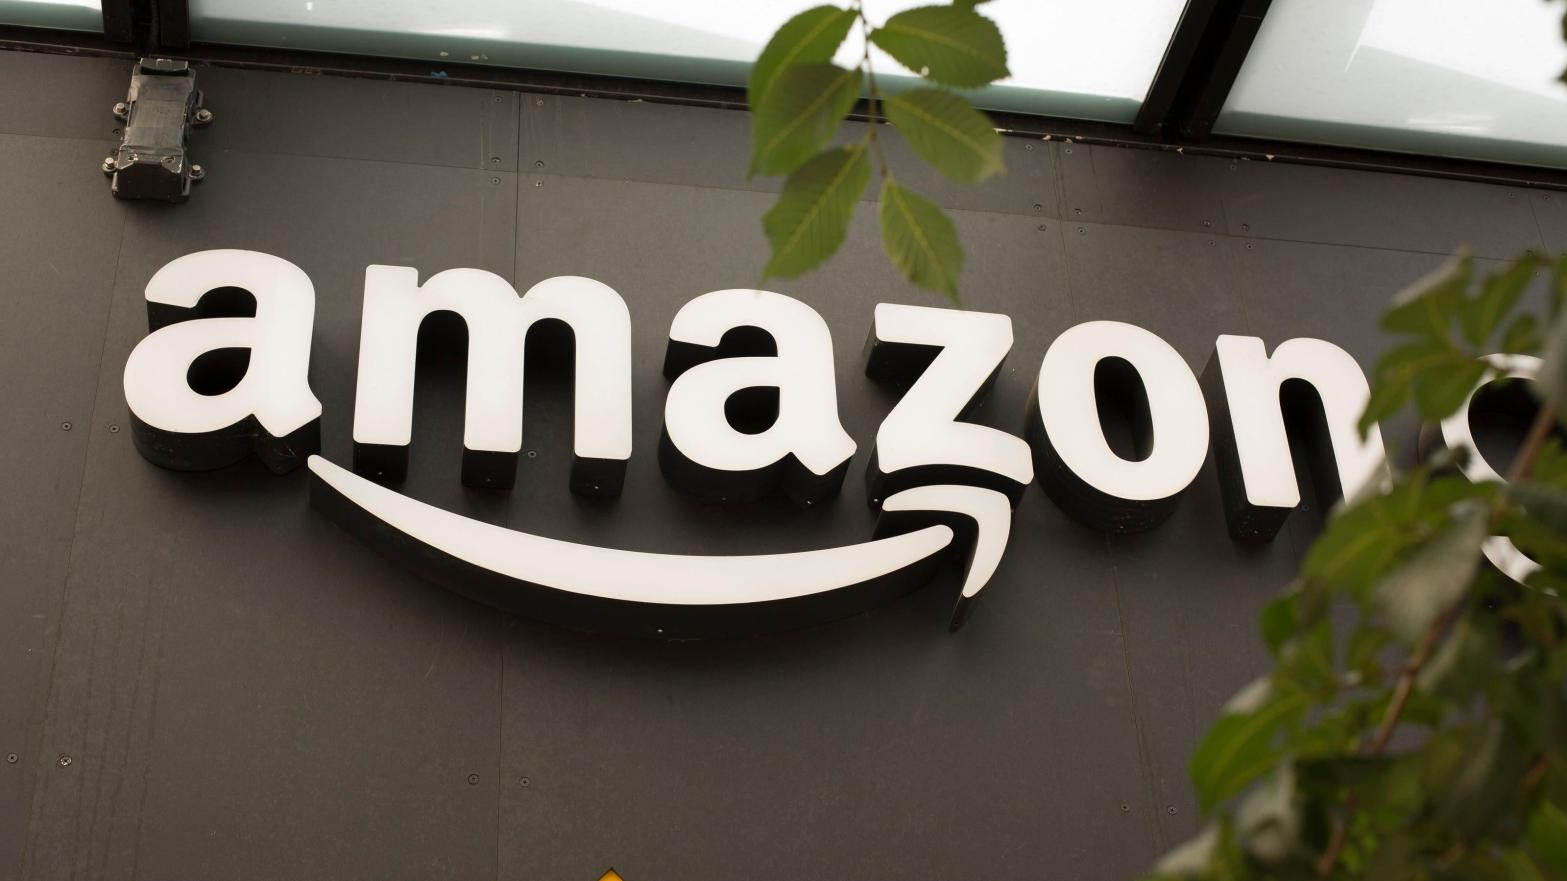 Amazon claims that AmazonSmile has donated $US400 ($555) million to U.S. charities. (Image: David Ryder, Getty Images)